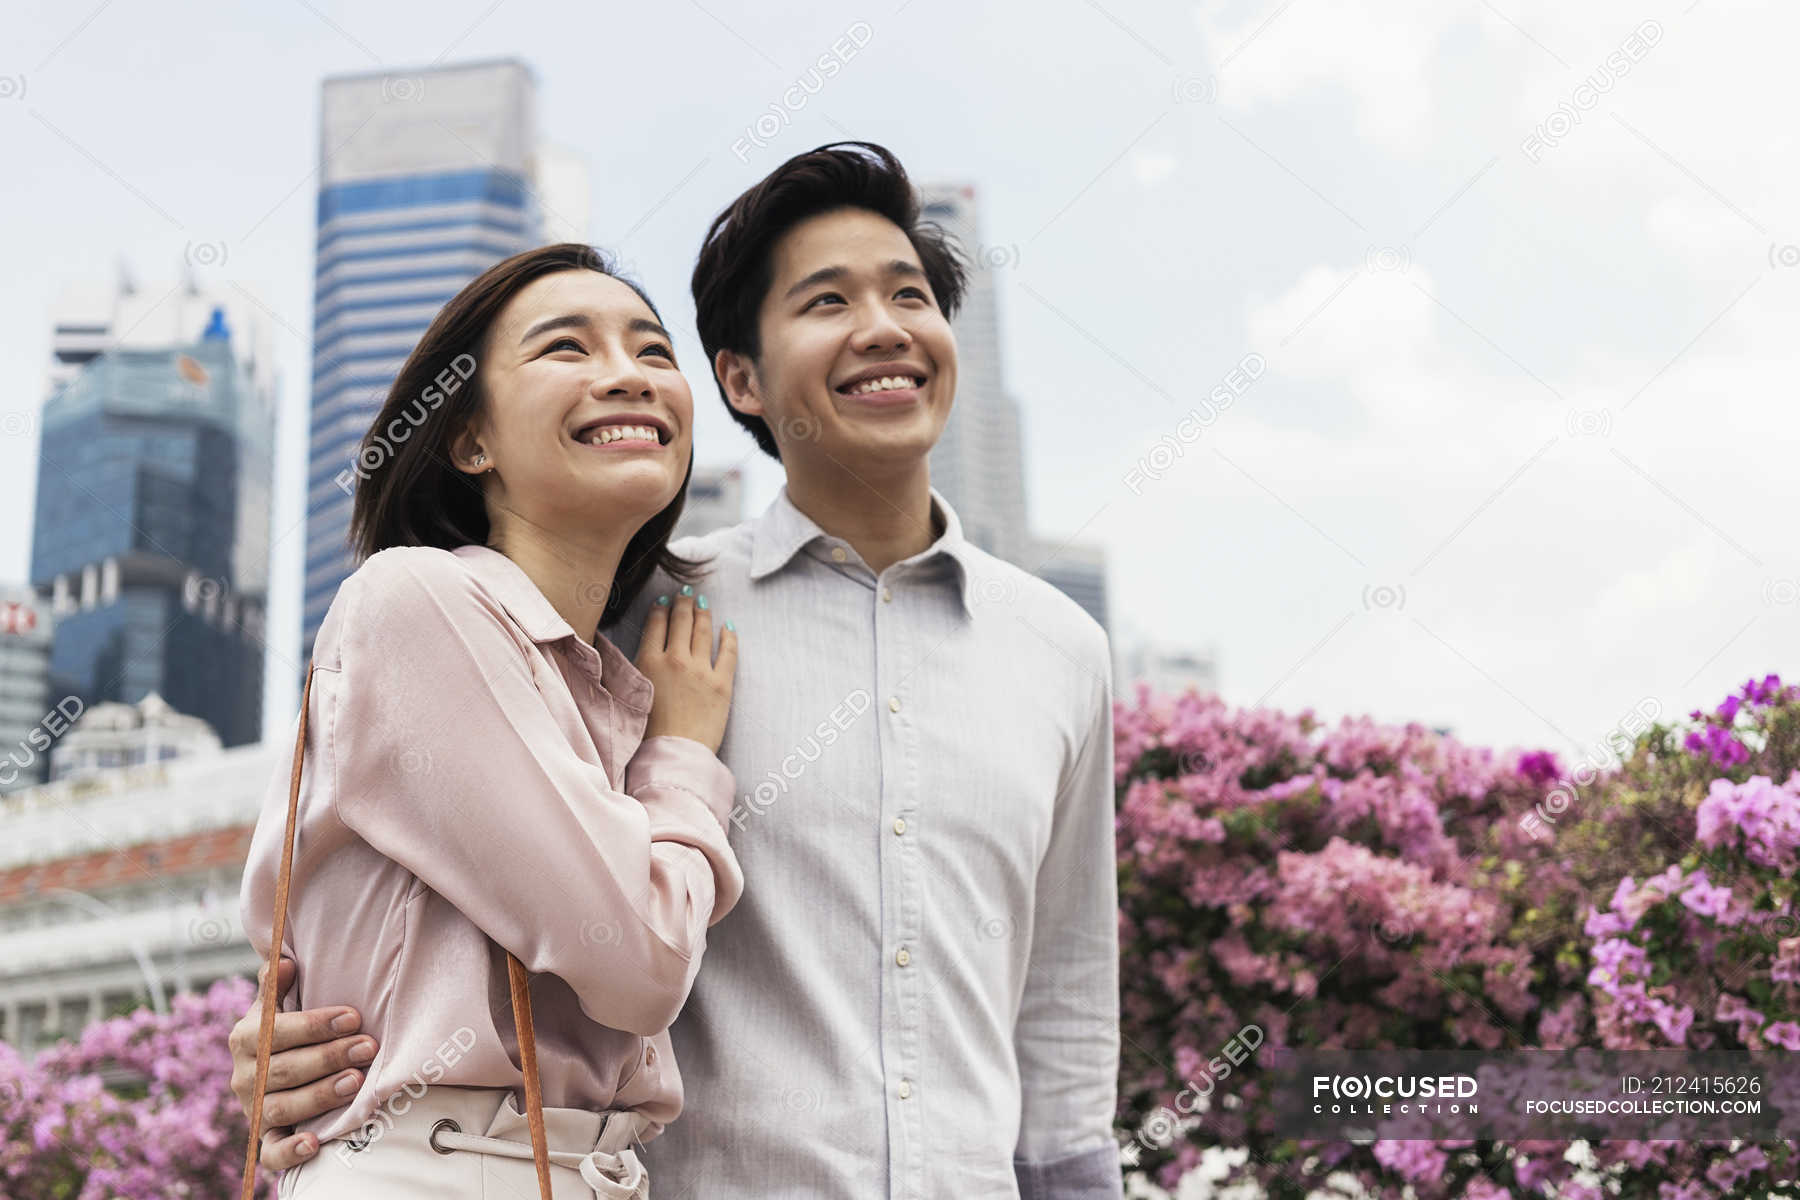 focused_212415626-stock-photo-young-asian-couple-spending-time.jpg